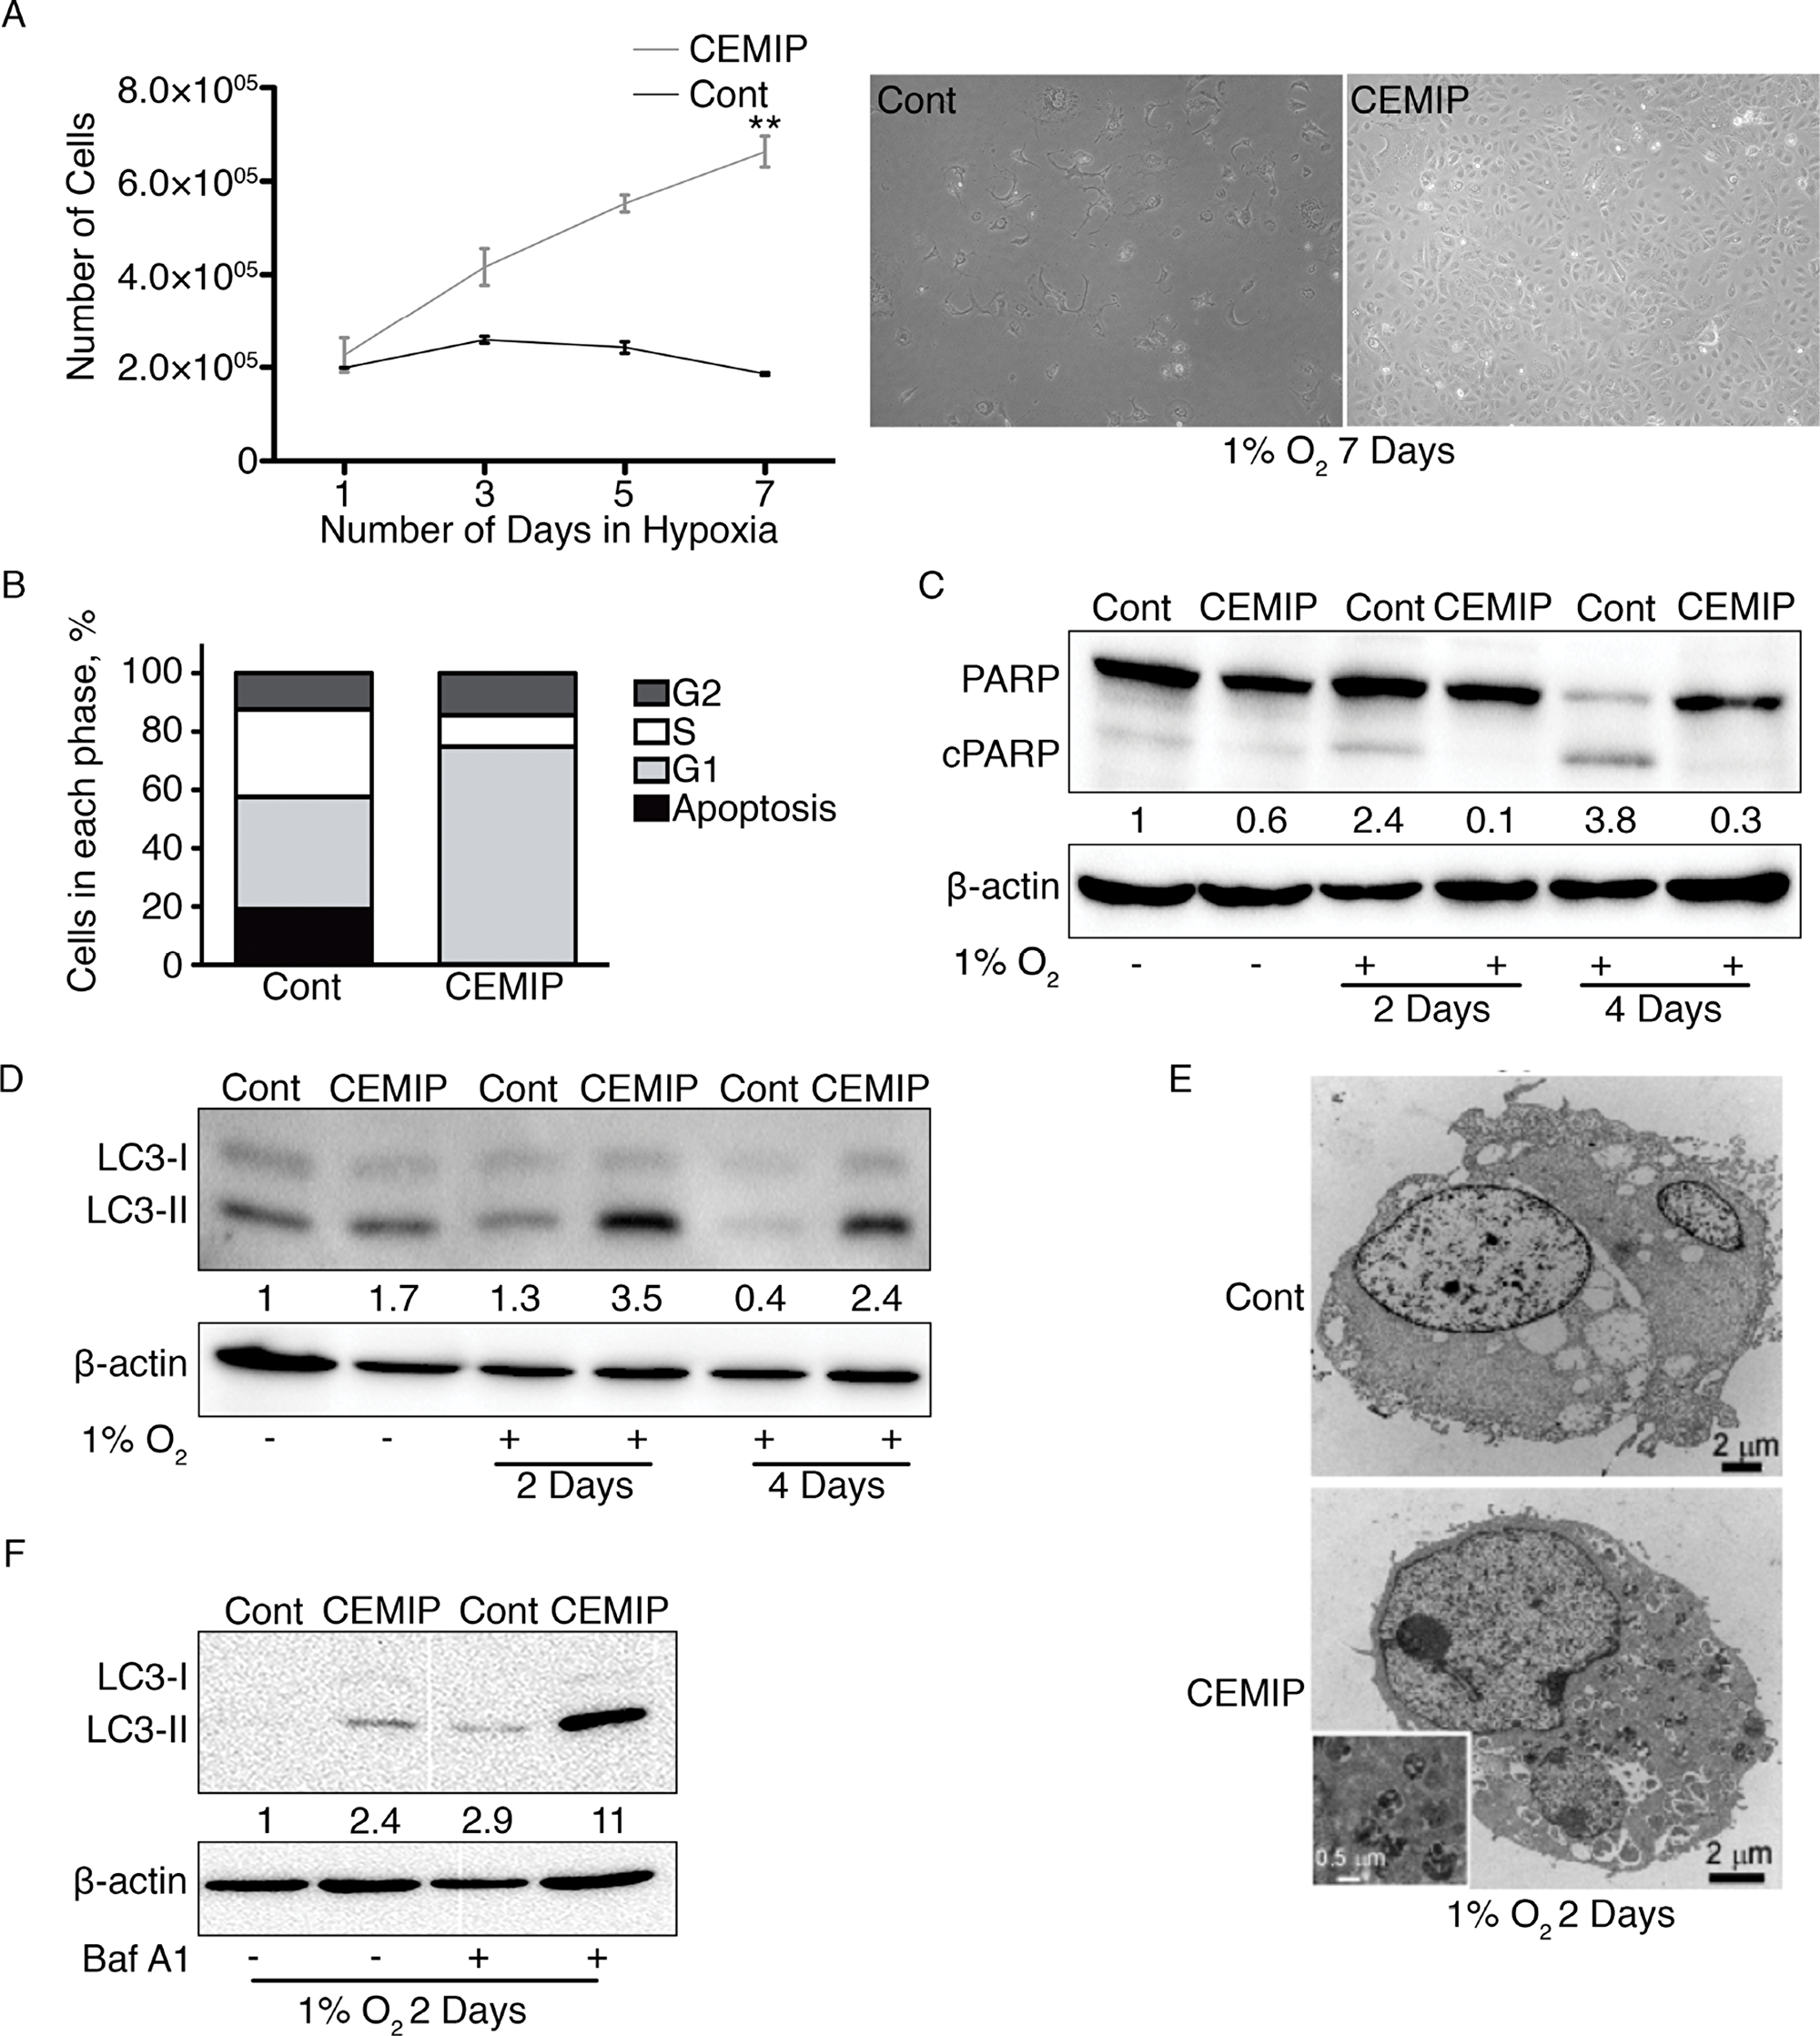 CEMIP promotes cell survival in hypoxic conditions by decreasing apoptosis and increasing autophagy.